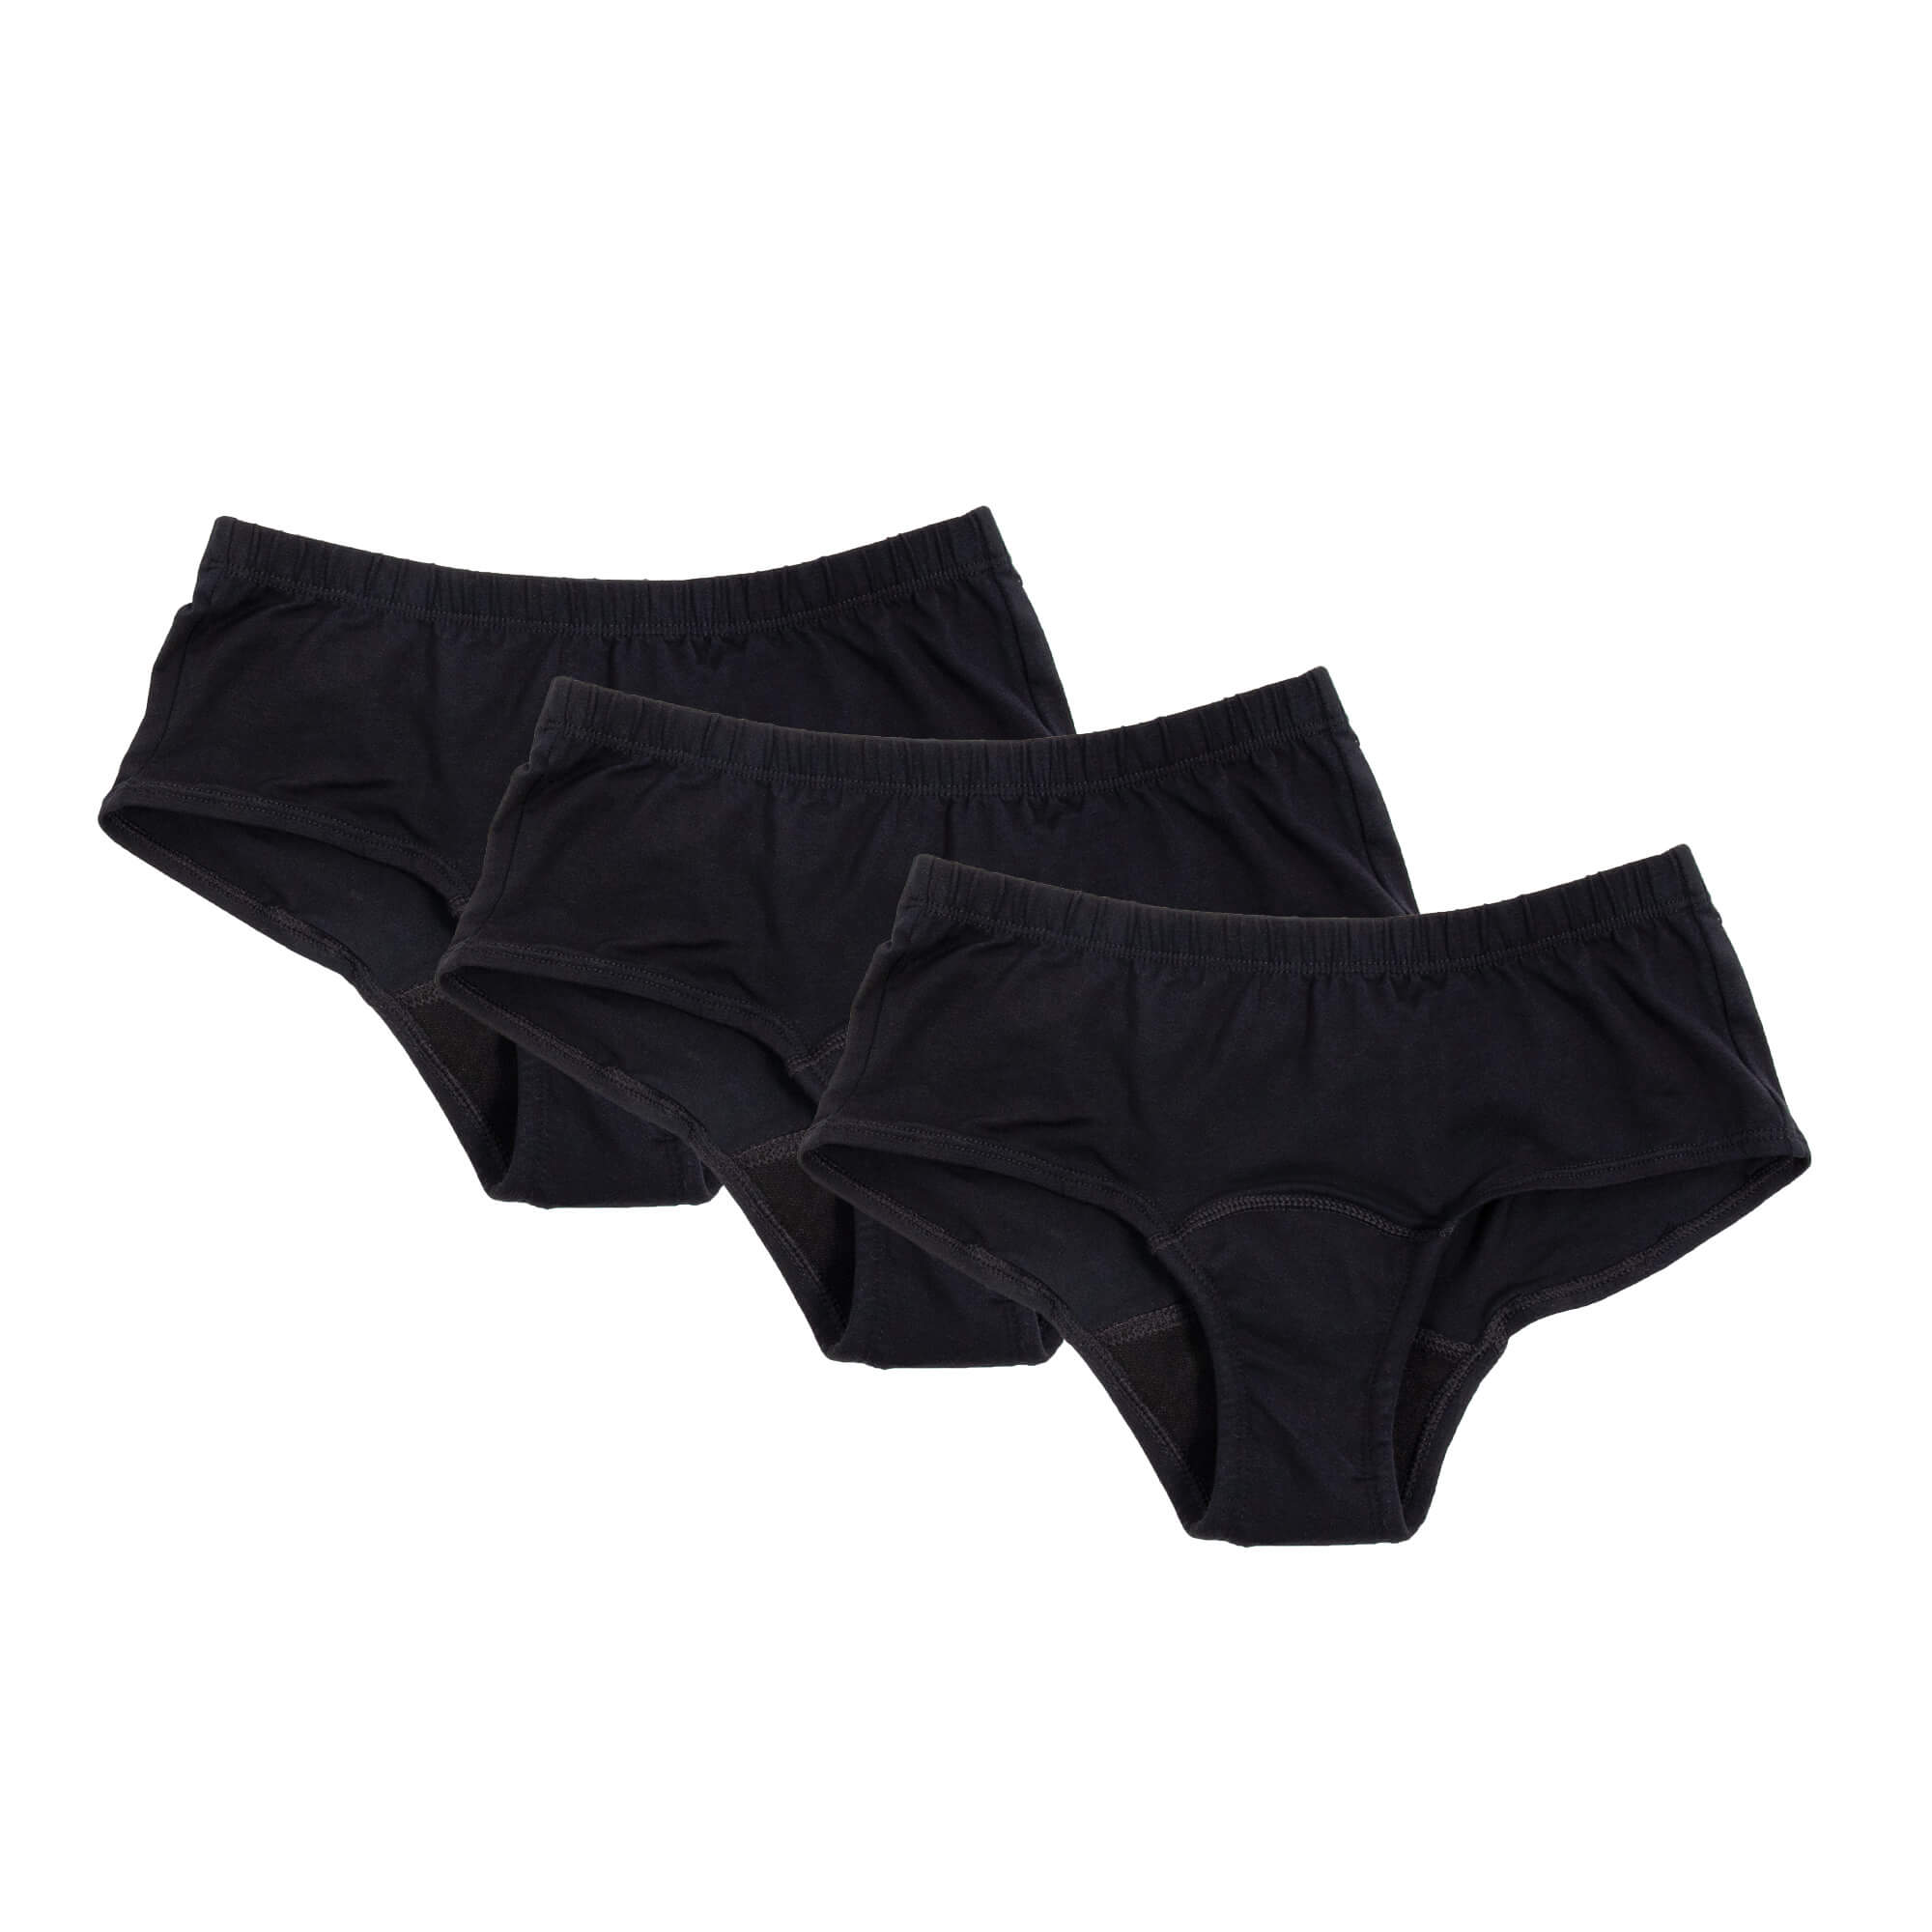 Conni Active Women's Incontinence Underwear With Purpose